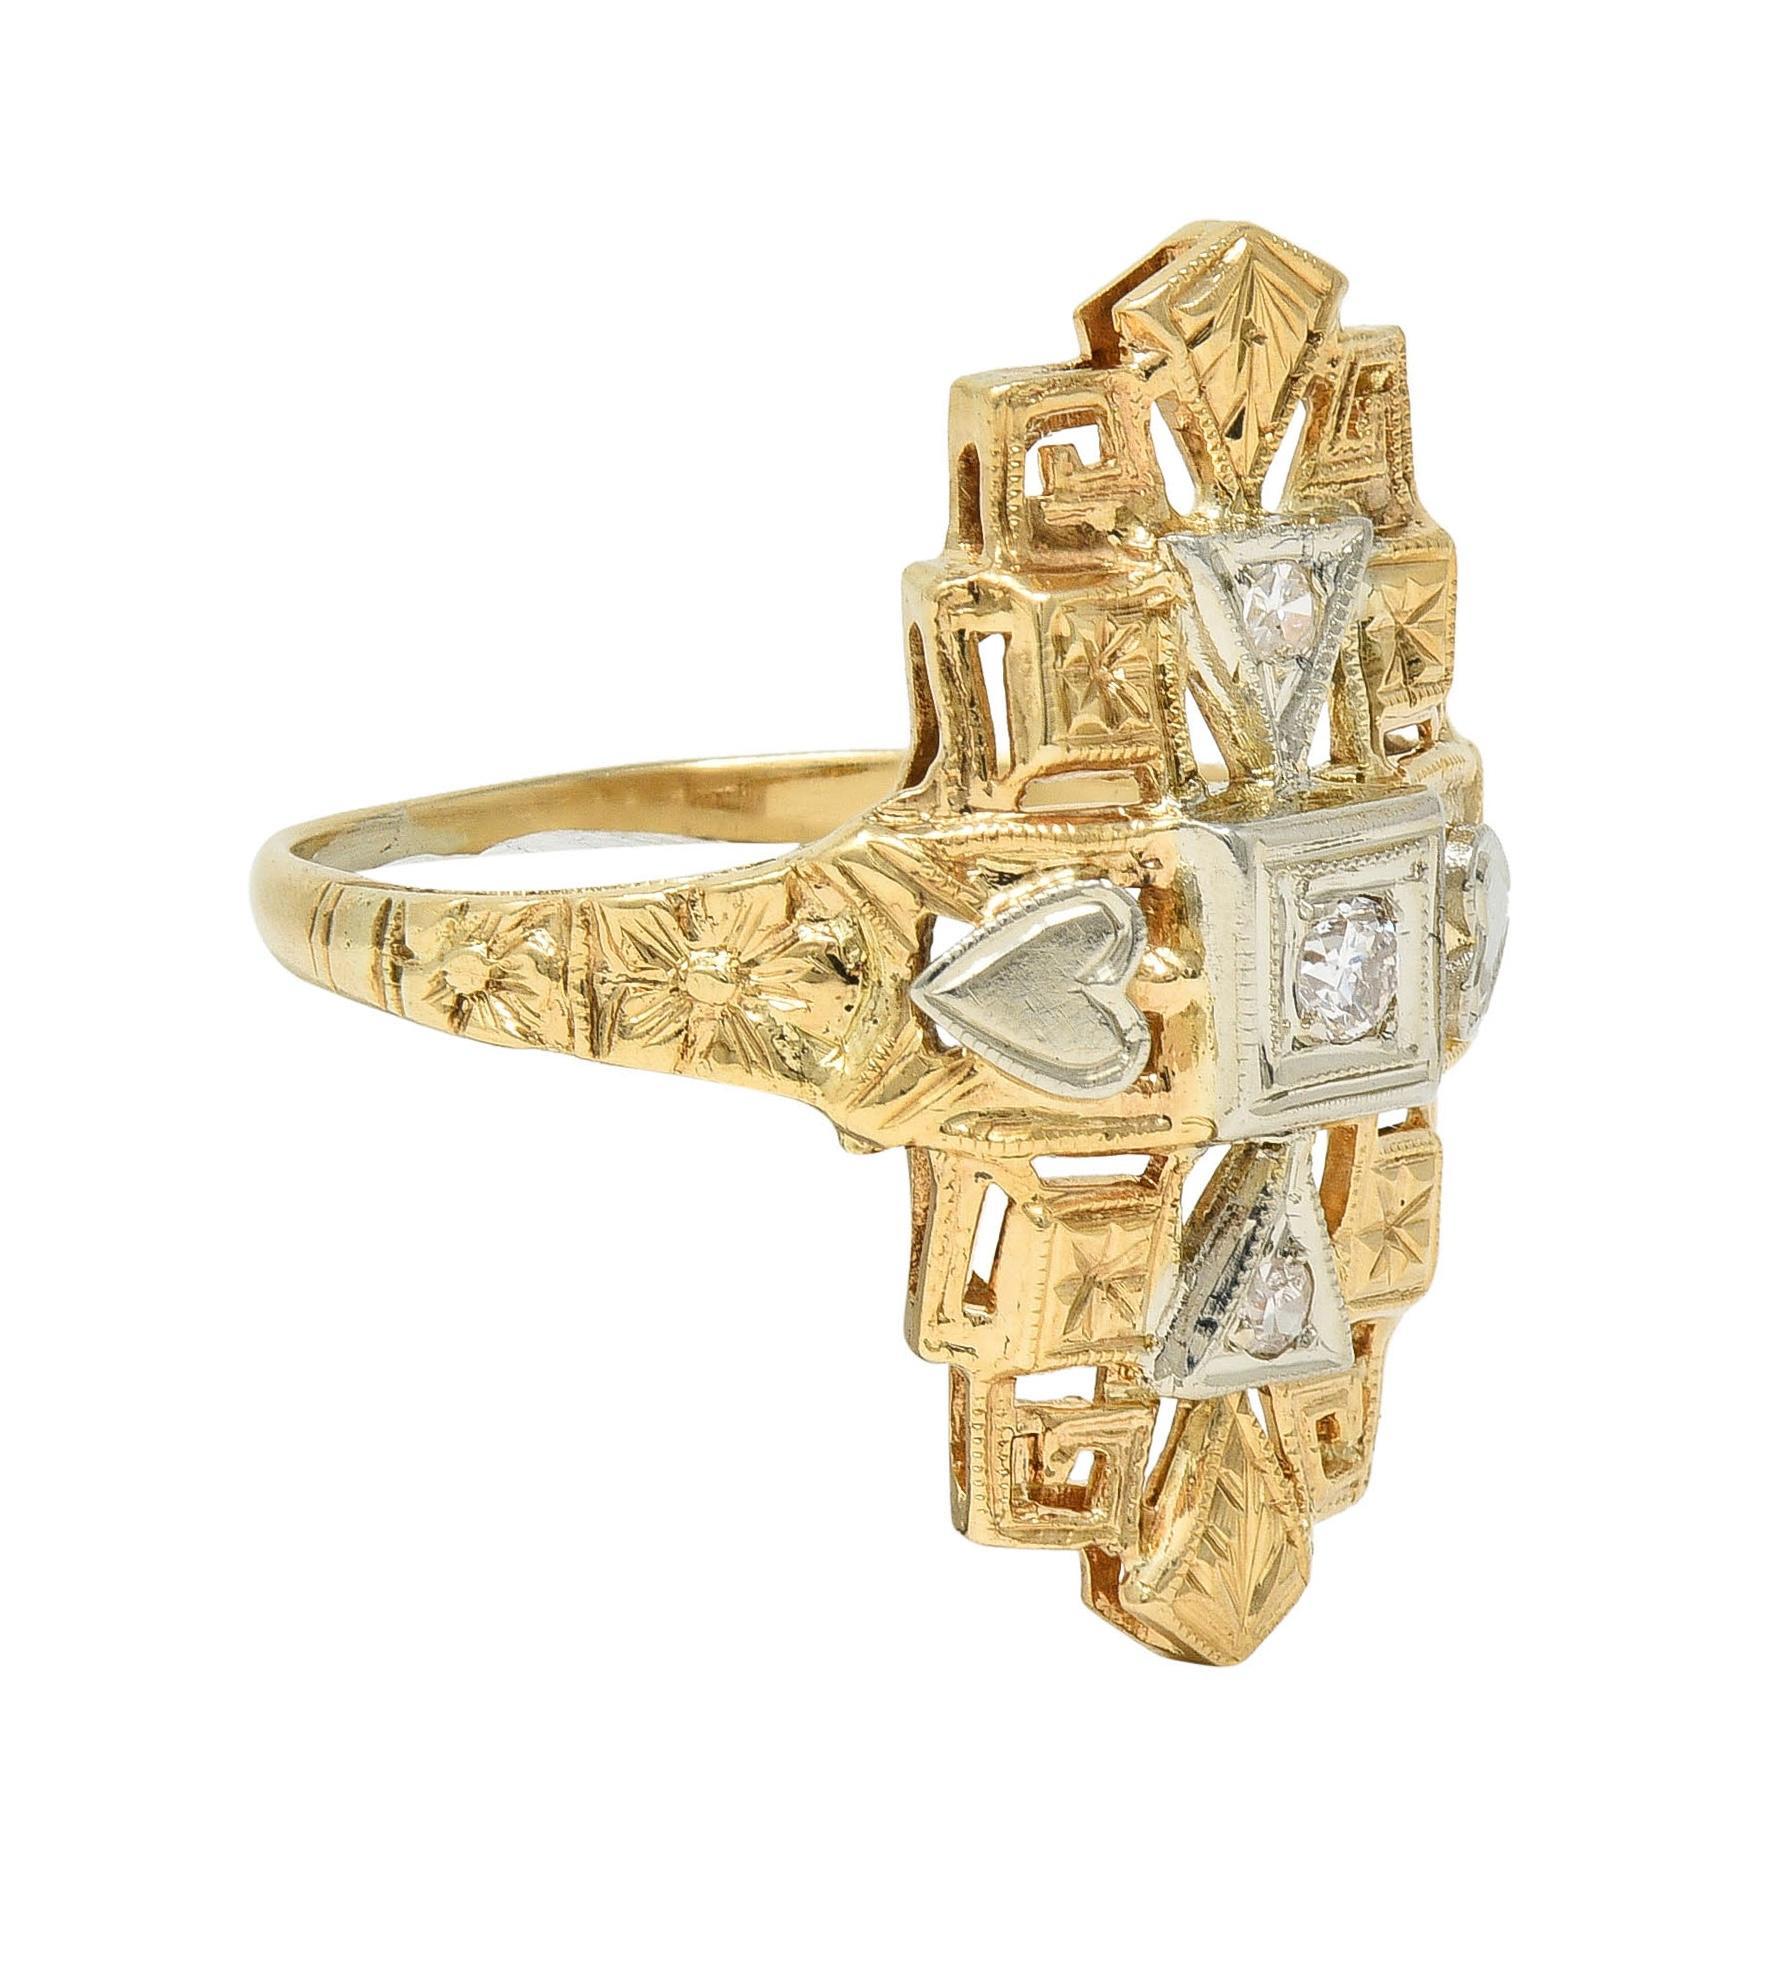 Designed as a pierced navette-shaped form with a tiered streamlined composition
Decorated with pierced Greek key and engraved orange blossom motifs
Centering a transitional cut diamond flanked by single cut diamonds
Weighing approximately 0.14 carat